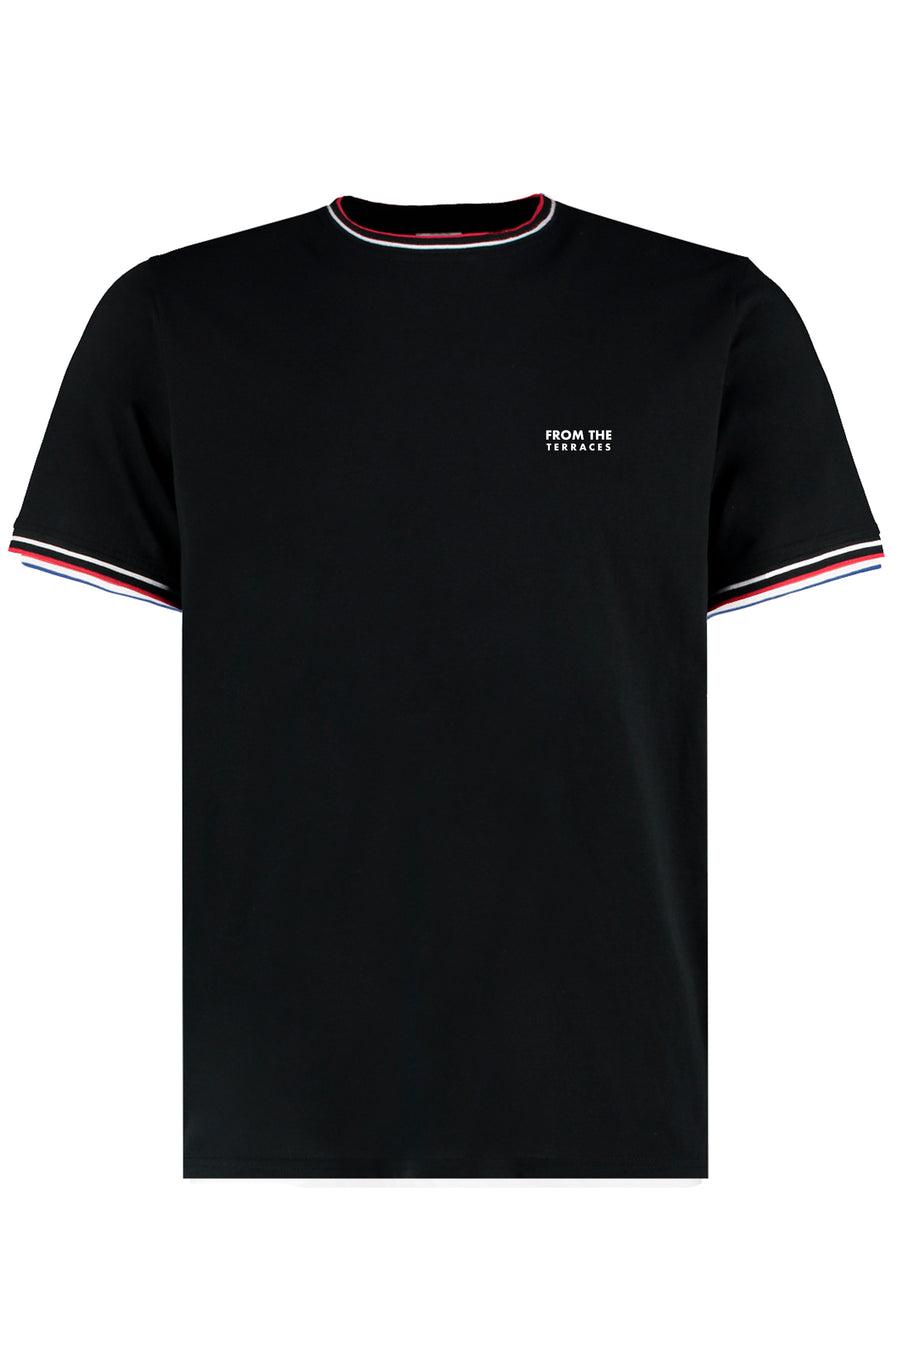 Tifoso Tipped Tee Black with White and Red